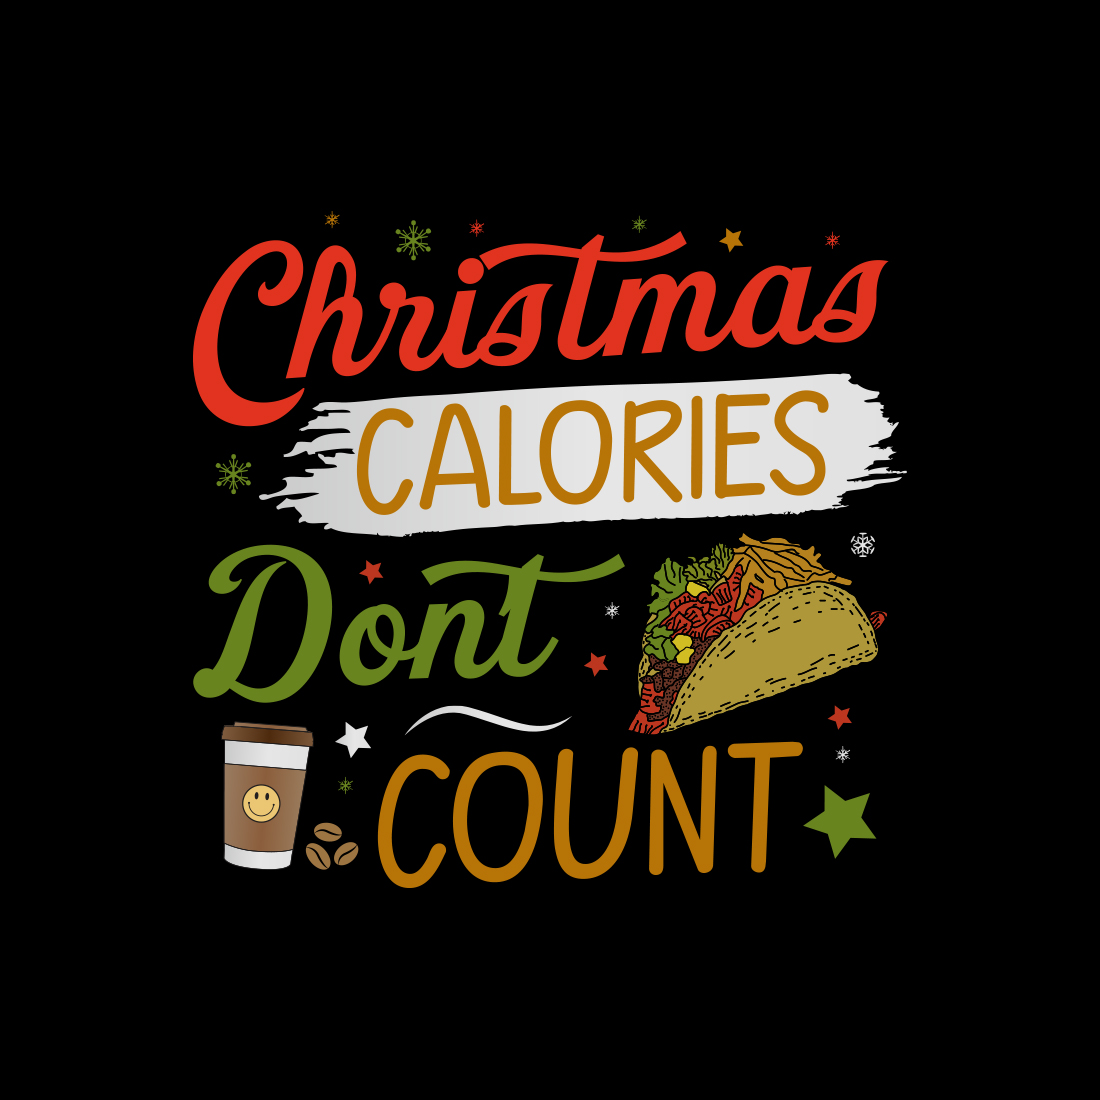 Christmas calories don't count design preview image.